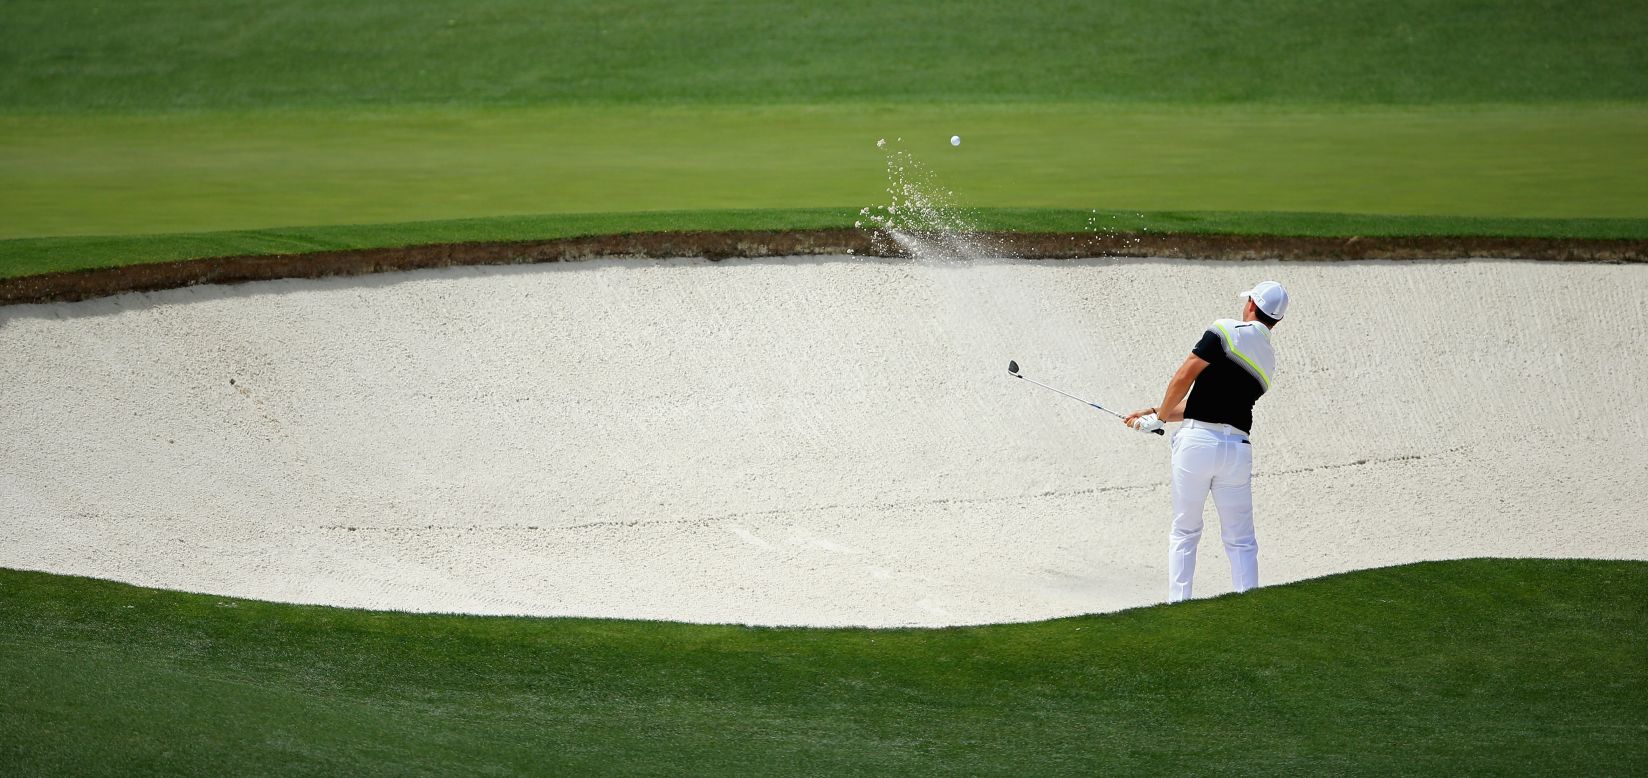 McIlroy enjoyed a brilliant front nine, but fell away during the last few holes.